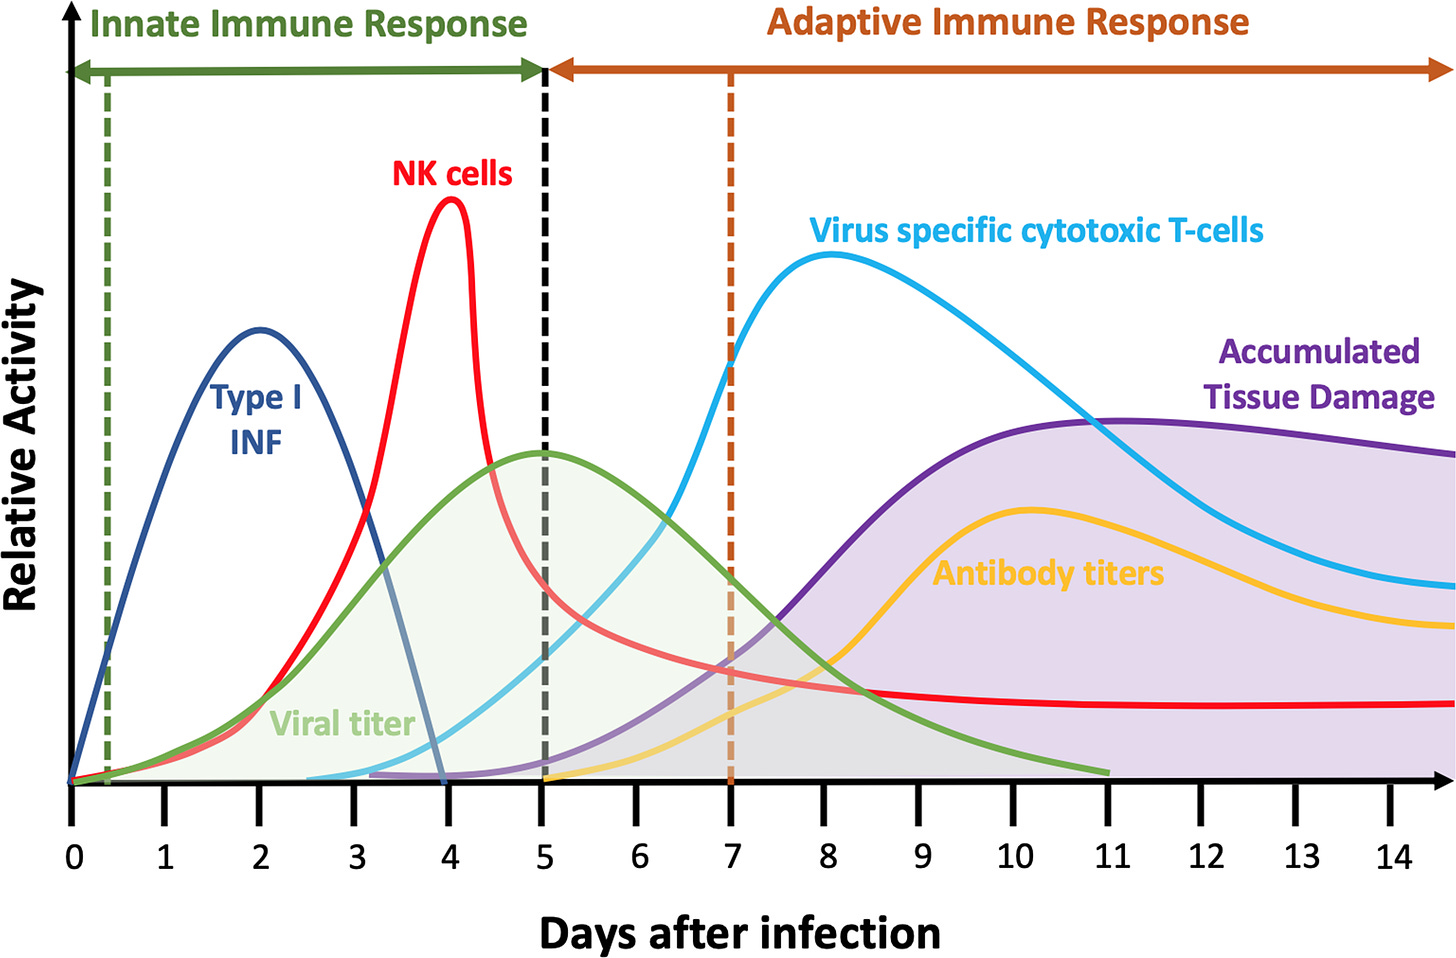 Summary Of Immune Response Timeline To The Infection Of The, 59% OFF